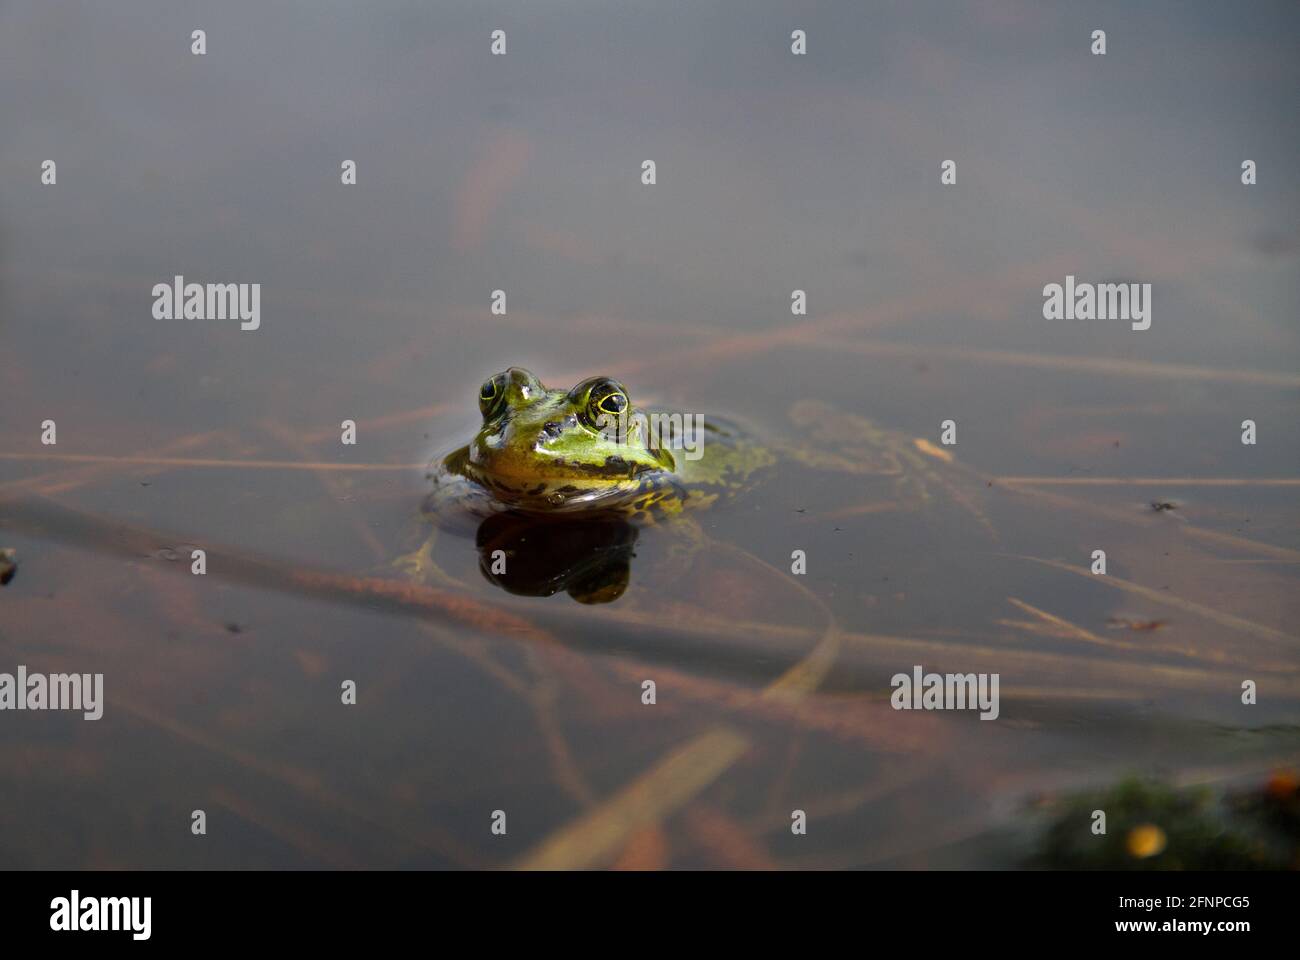 Green frog, probably a Marsh frog or Pool frog, swimming in a pond Stock Photo